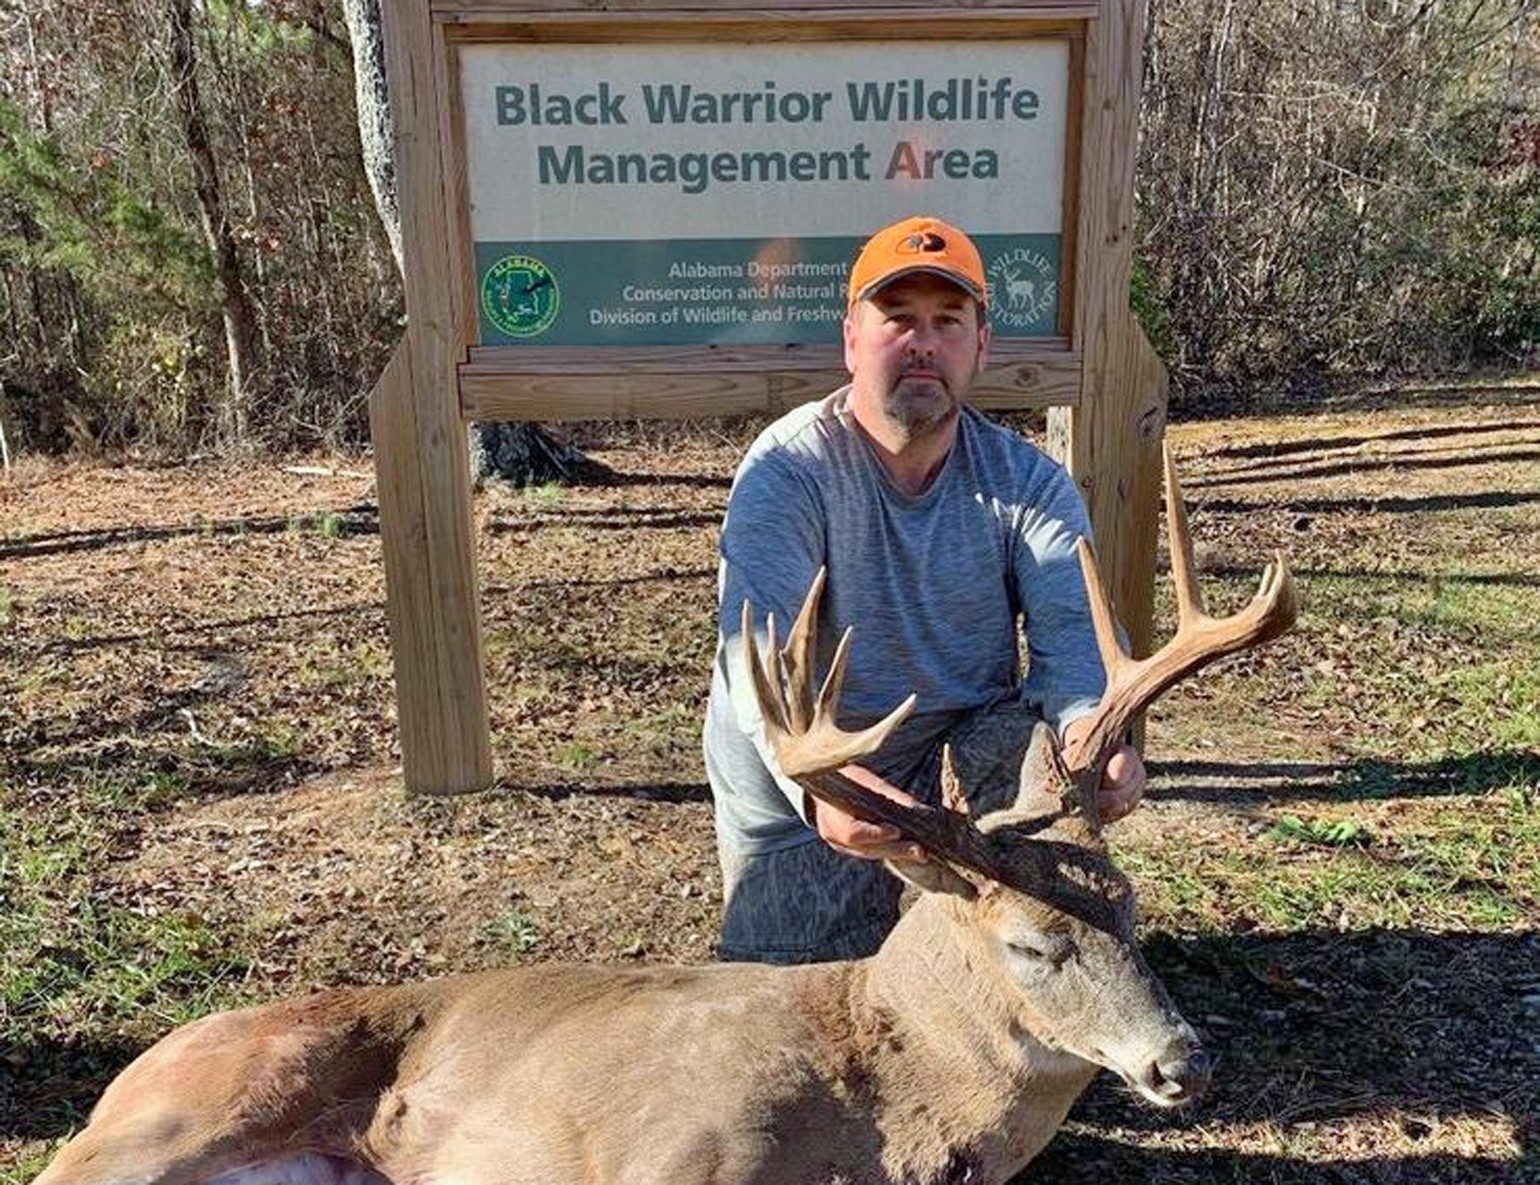 Public Land Provides Opportunities To Hunt Rut All Season-White Tail Deer Rutt Nc 2021